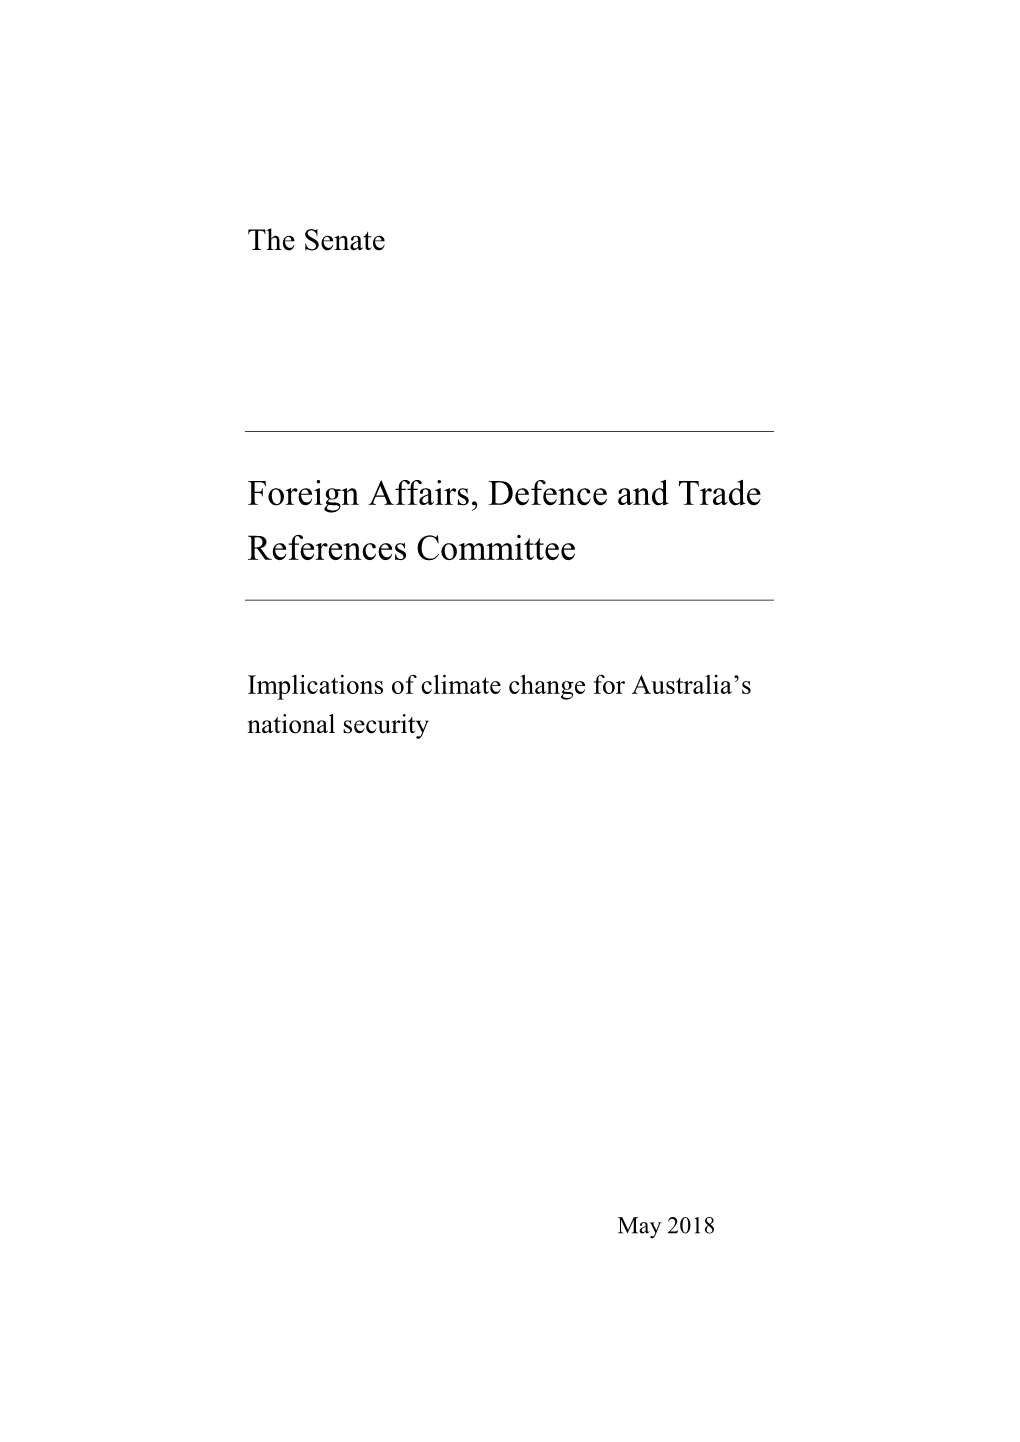 Foreign Affairs, Defence and Trade References Committee